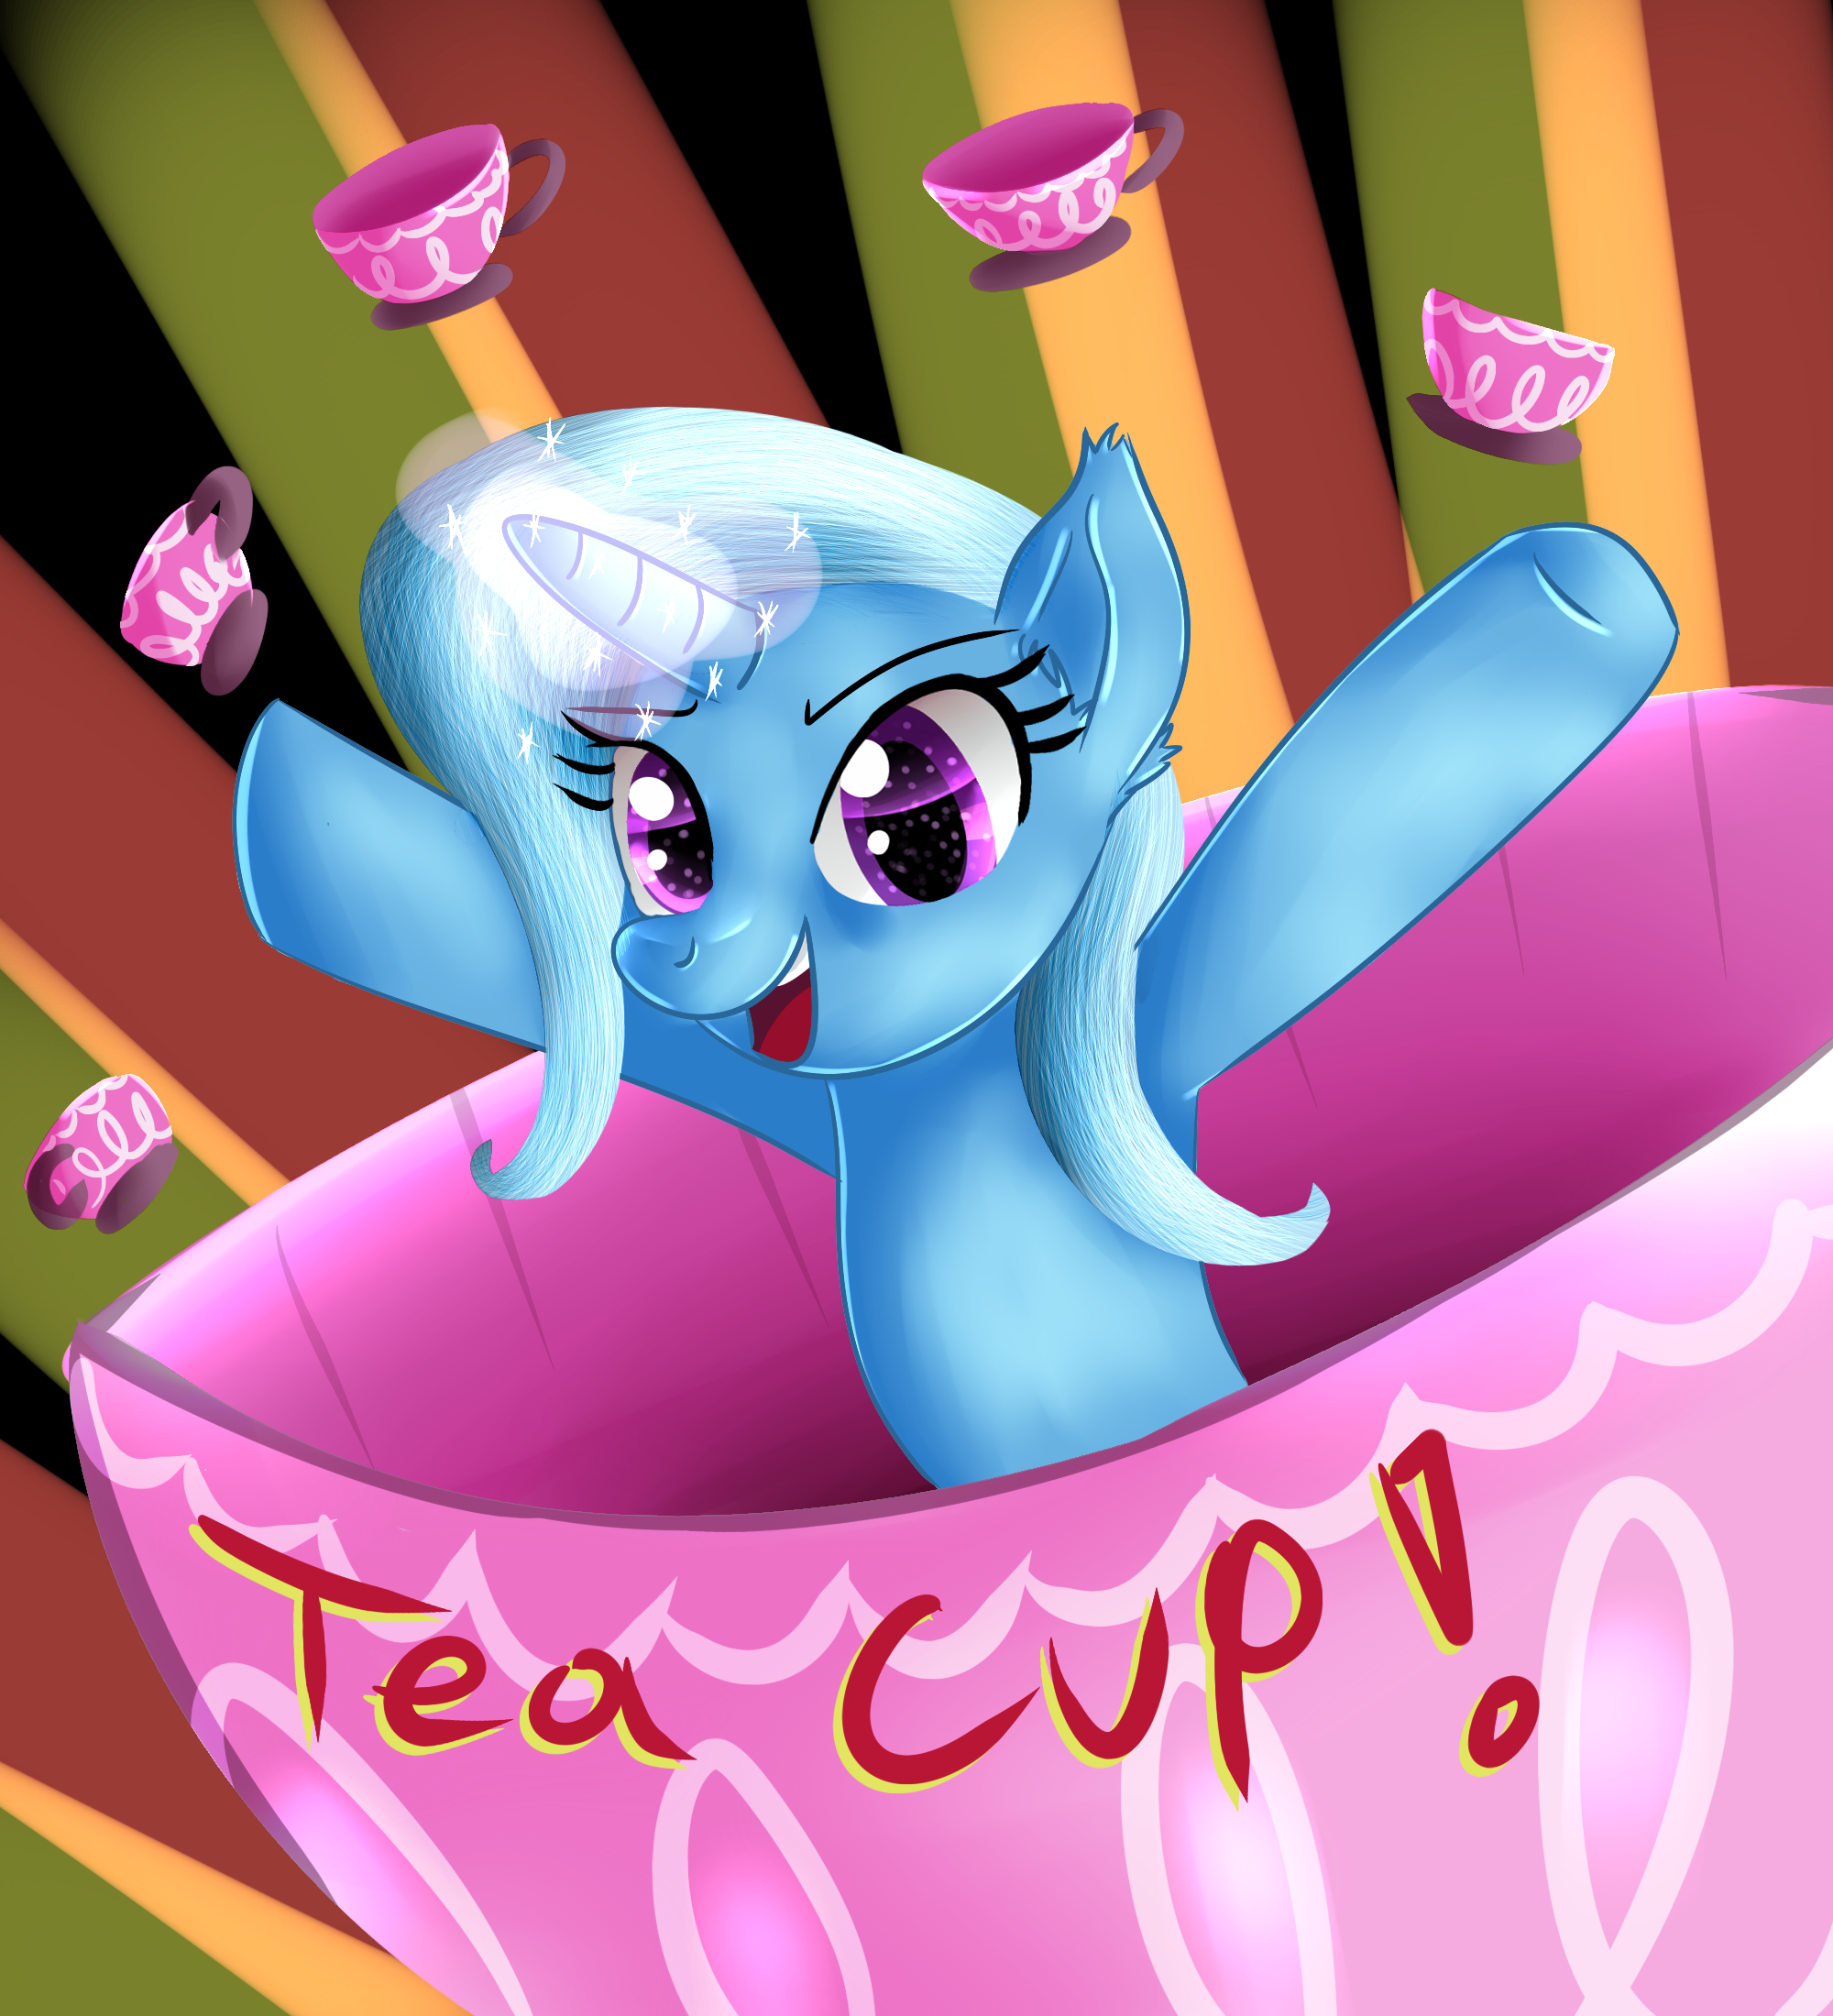 1412710__safe_artist-colon-katakiuchi4u_trixie_all+bottled+up_spoiler-colon-s07e02_cup_glowing+horn_pony_solo_teacup_that+pony+sure+does+love+teacups_t.png